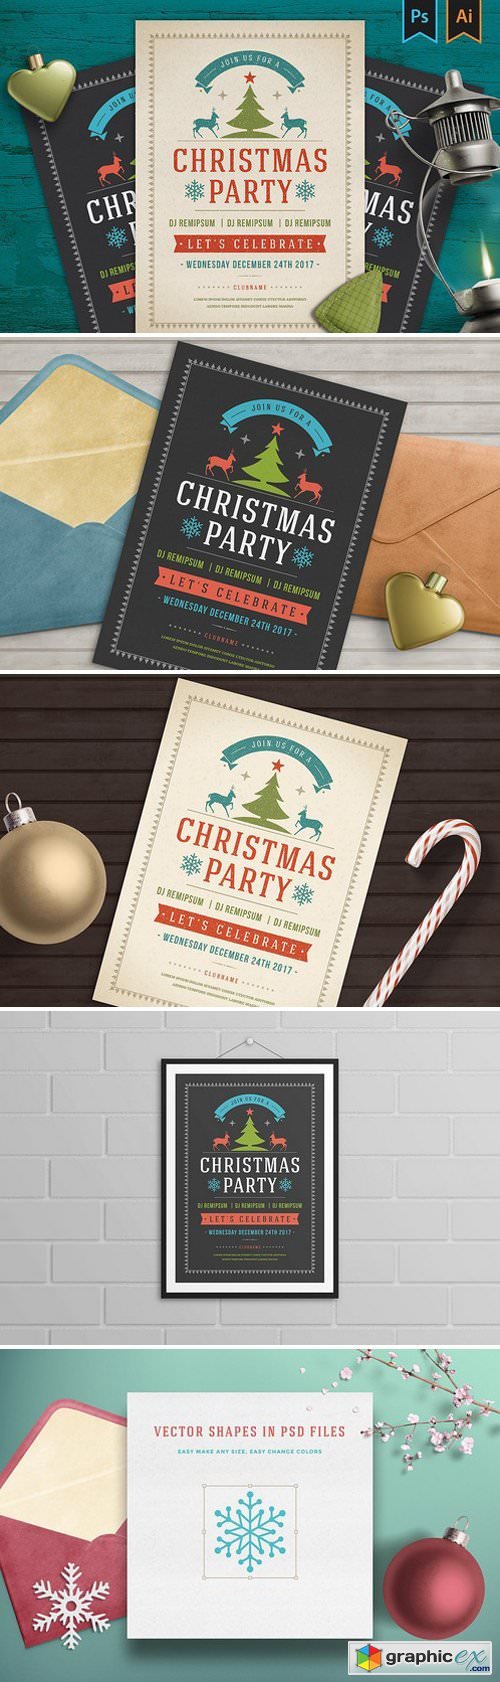 Christmas party invitation flyer 1903705